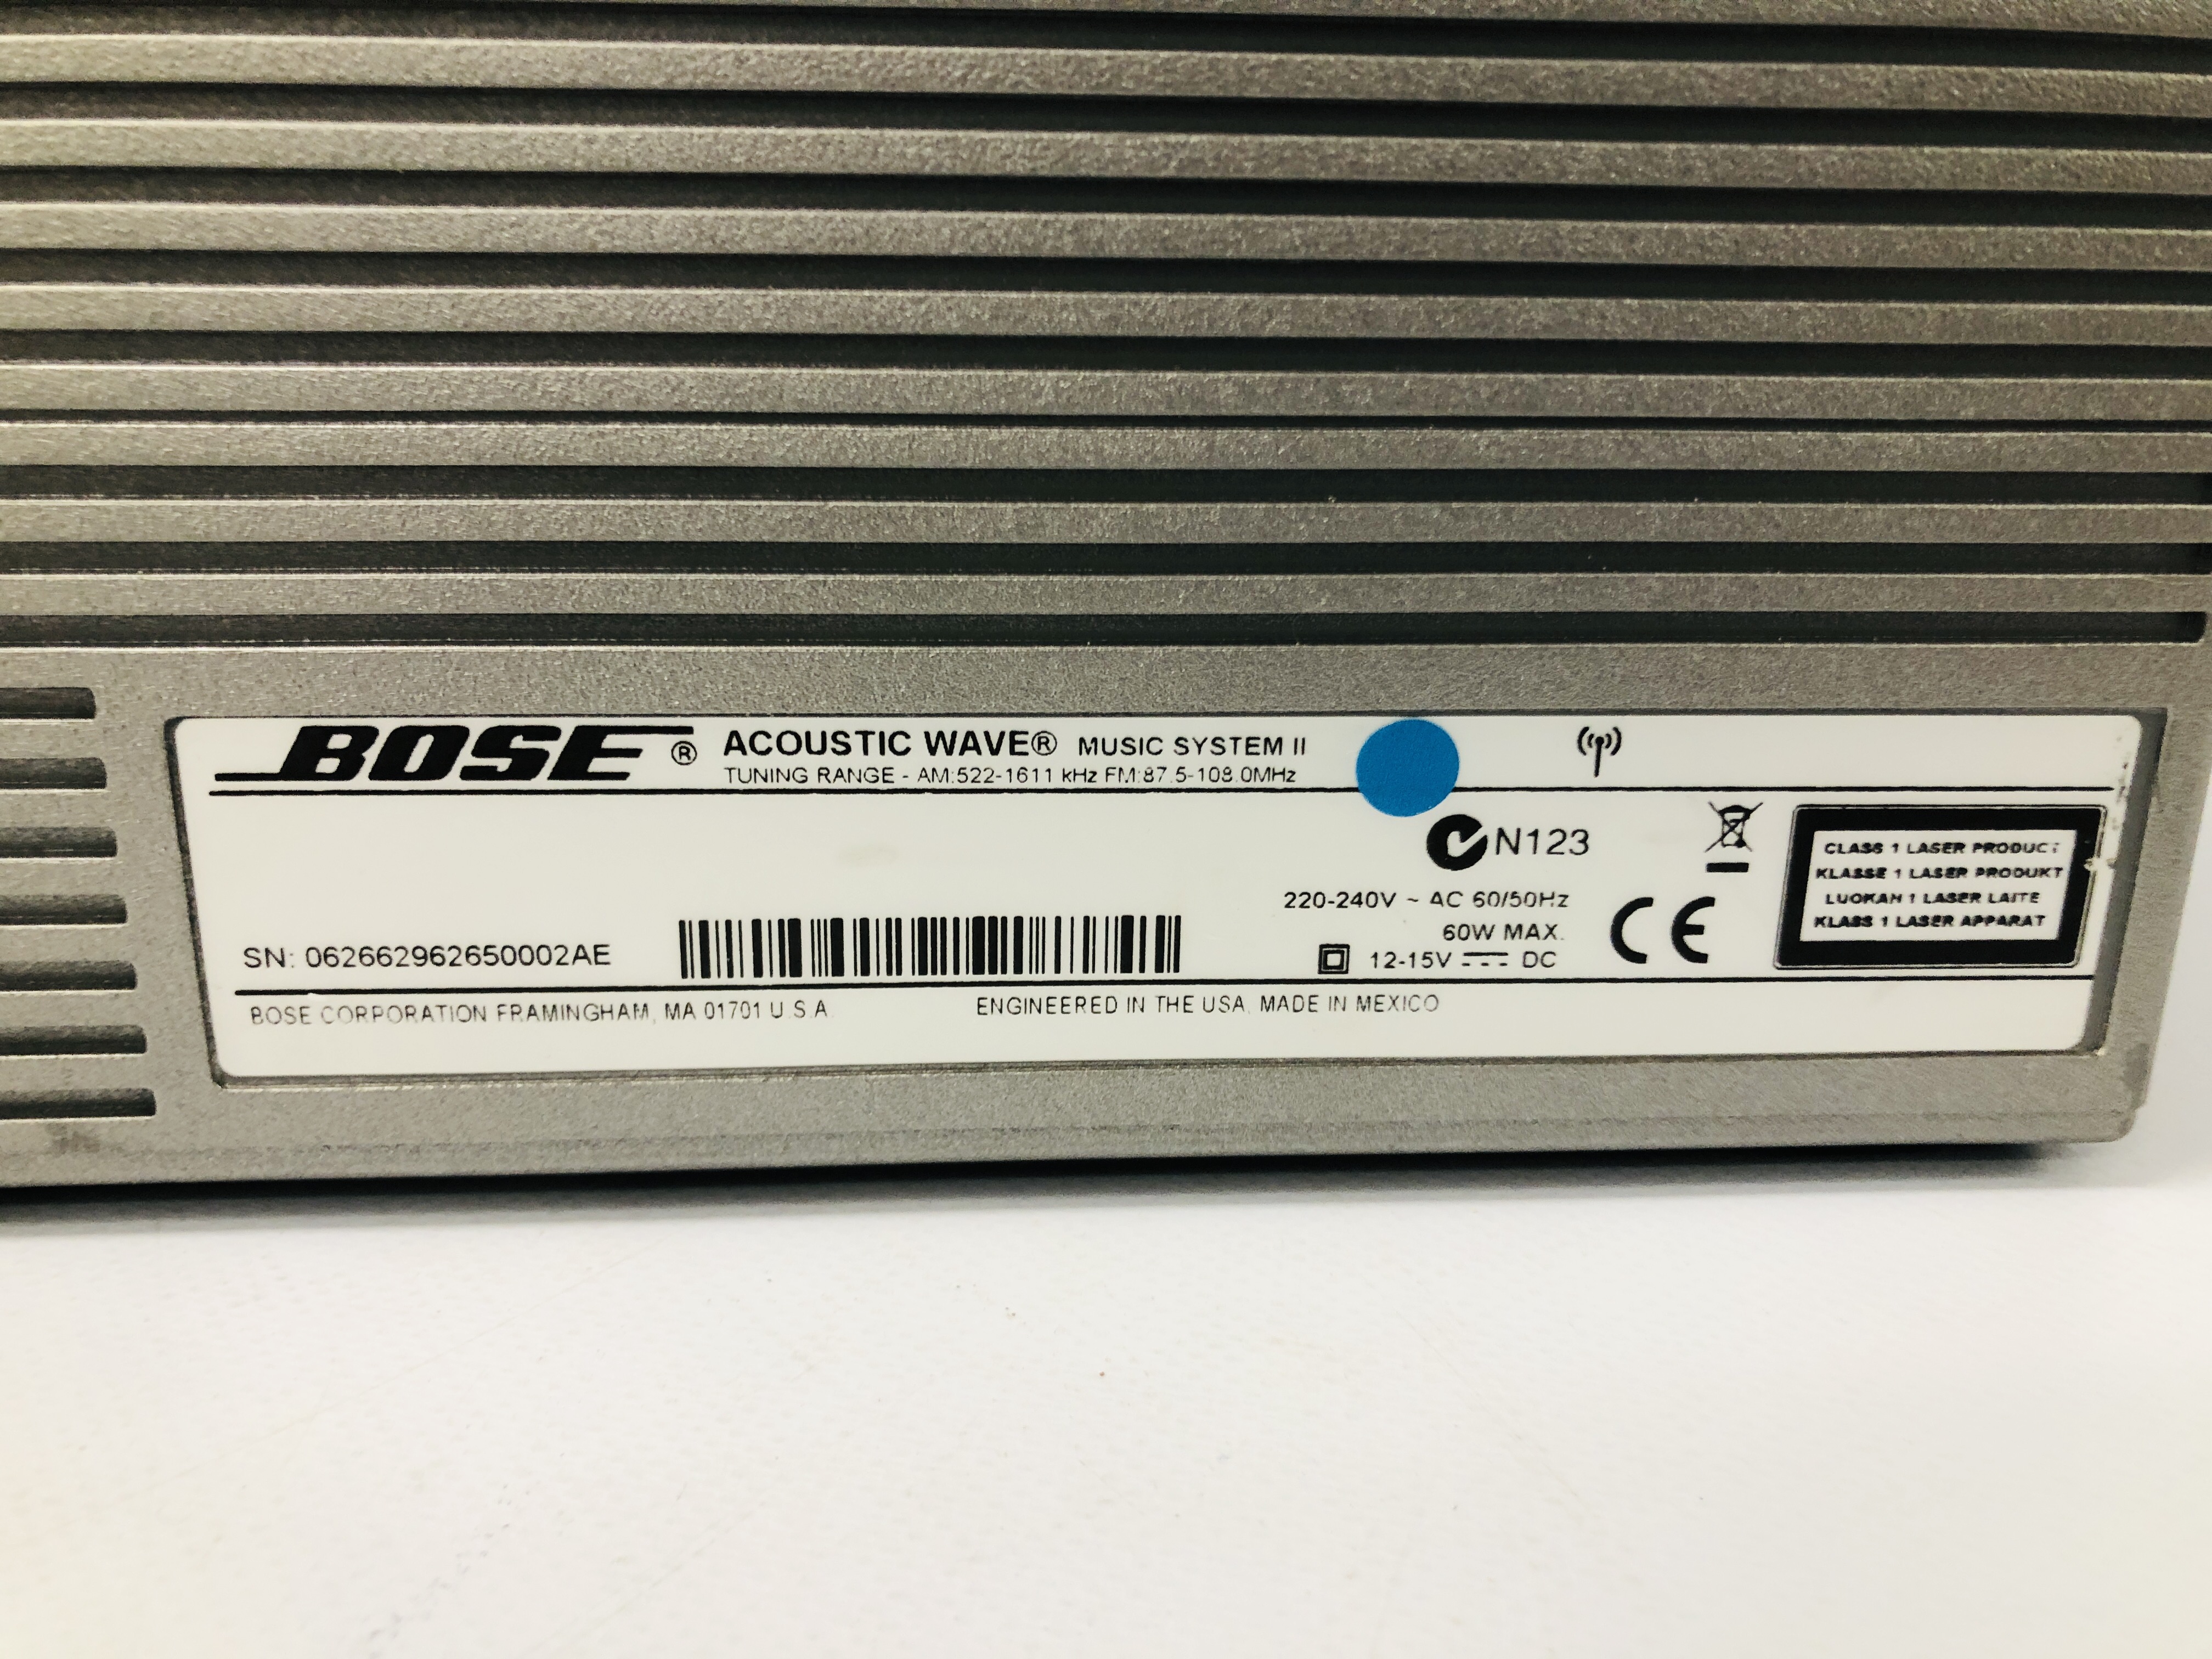 BOSE ACOUSTIC WAVE MUSIC SYSTEM 2 WITH REMOTE - SOLD AS SEEN - Image 5 of 6